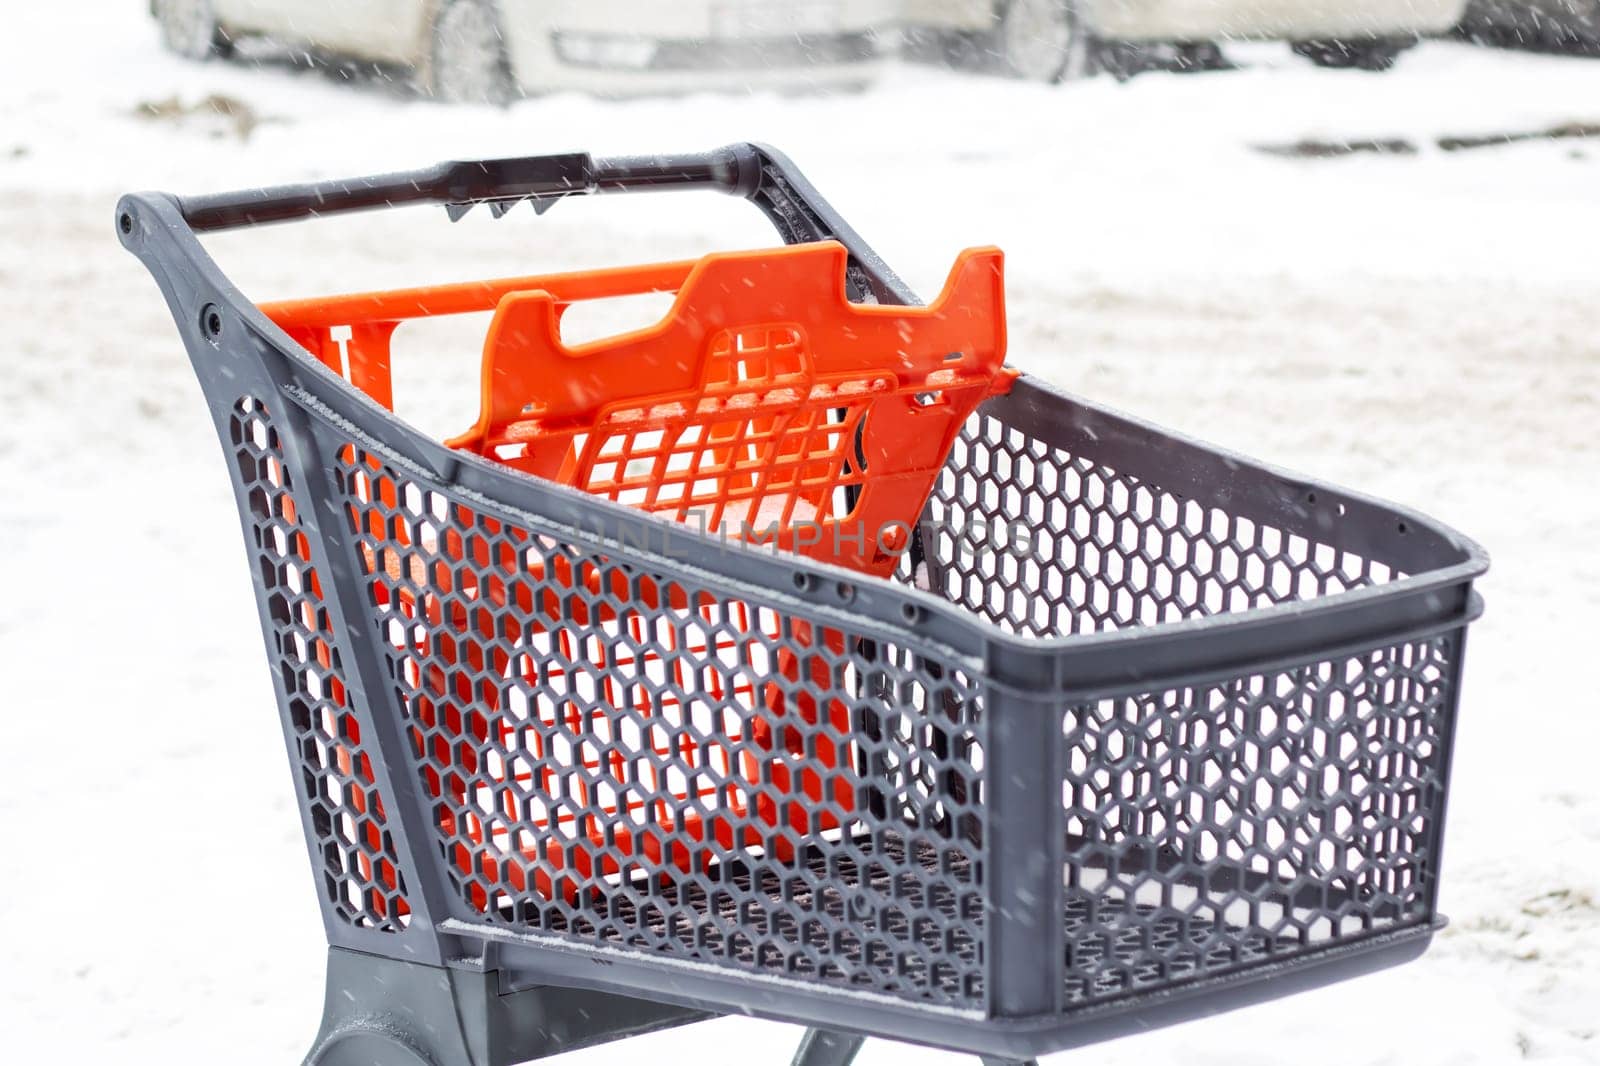 Shopping cart for outdoor shopping in the snow close up